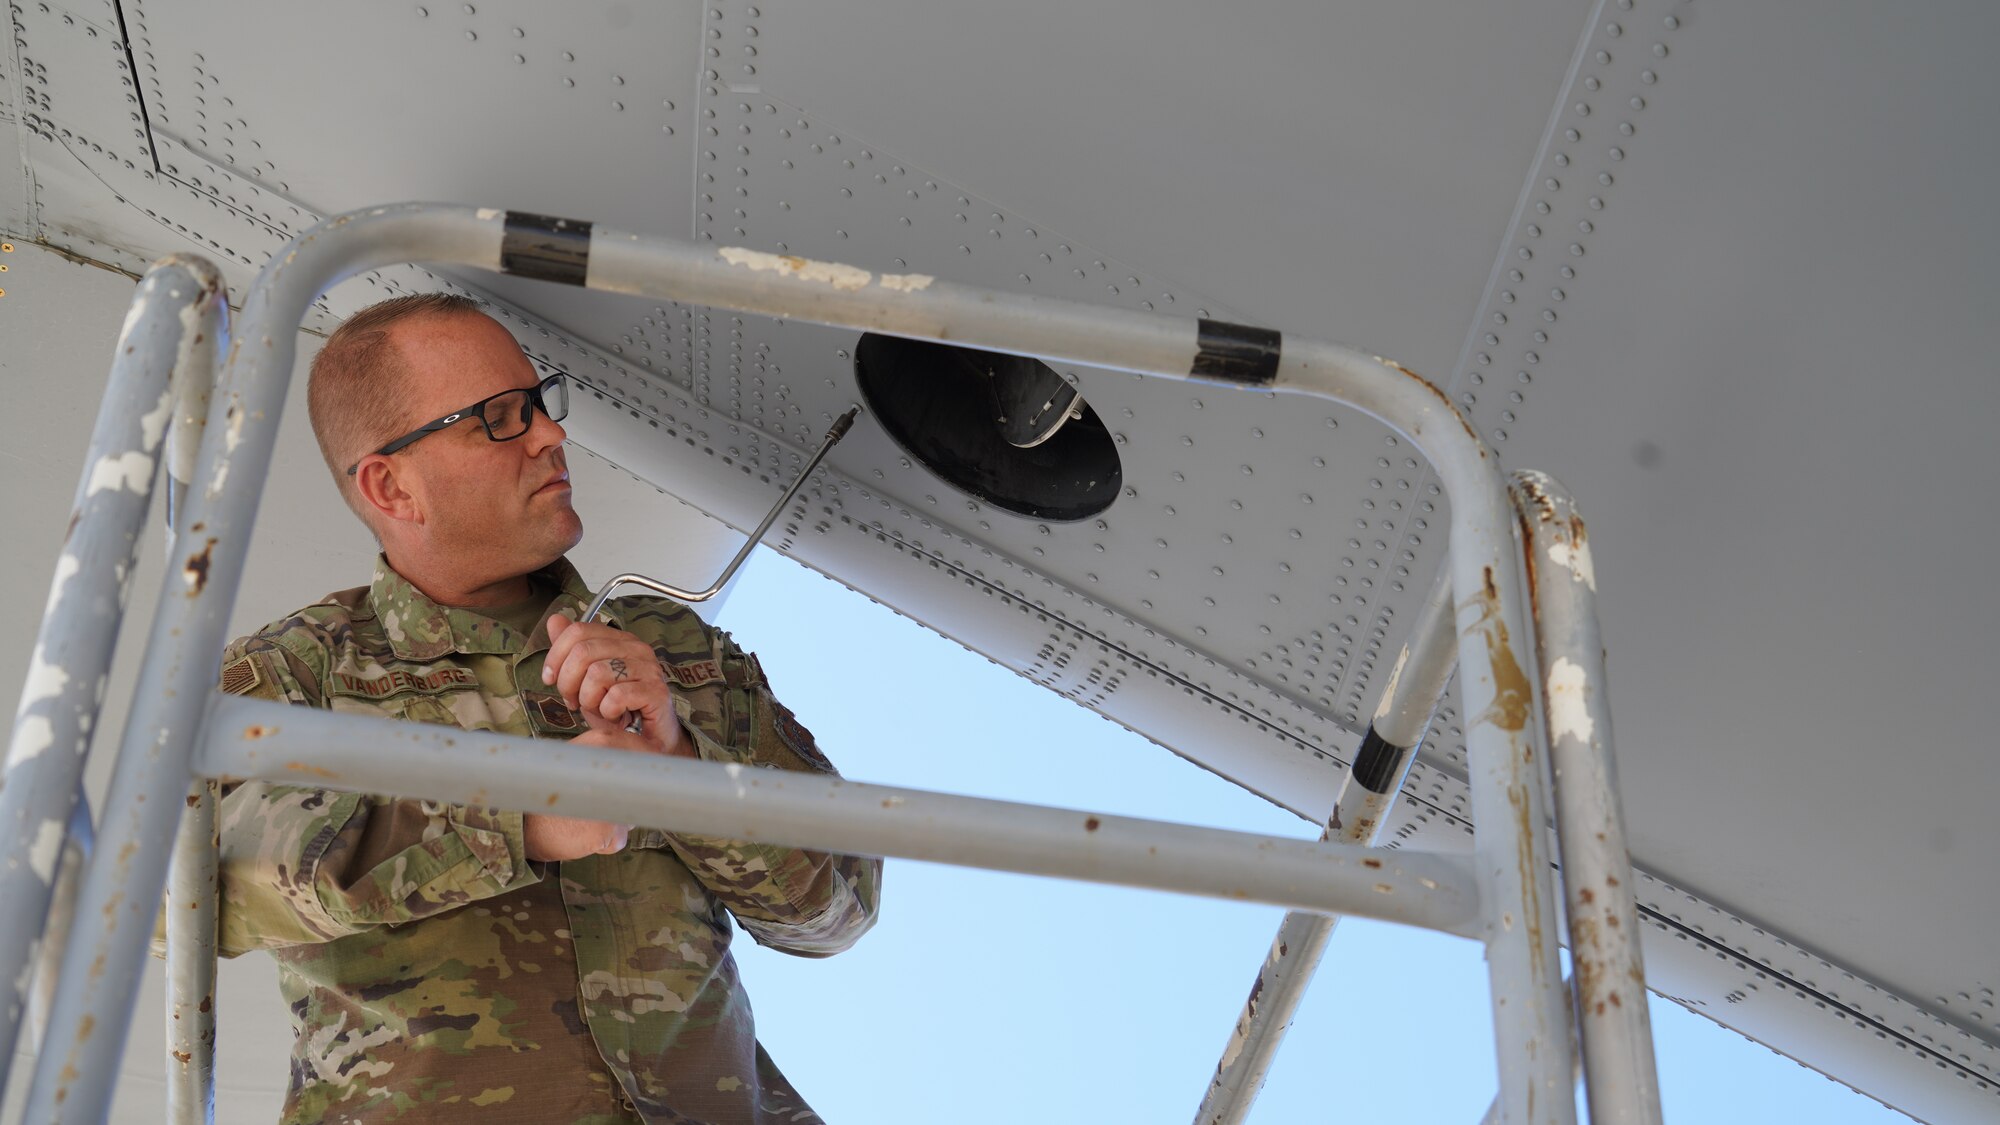 A photograph of a California Air National Guard Airman / Maintainer on top of an aircraft ladder using a specialized elongated tool to remove a bolt from behind and underneath the tail of a C-130J Super Hercules.